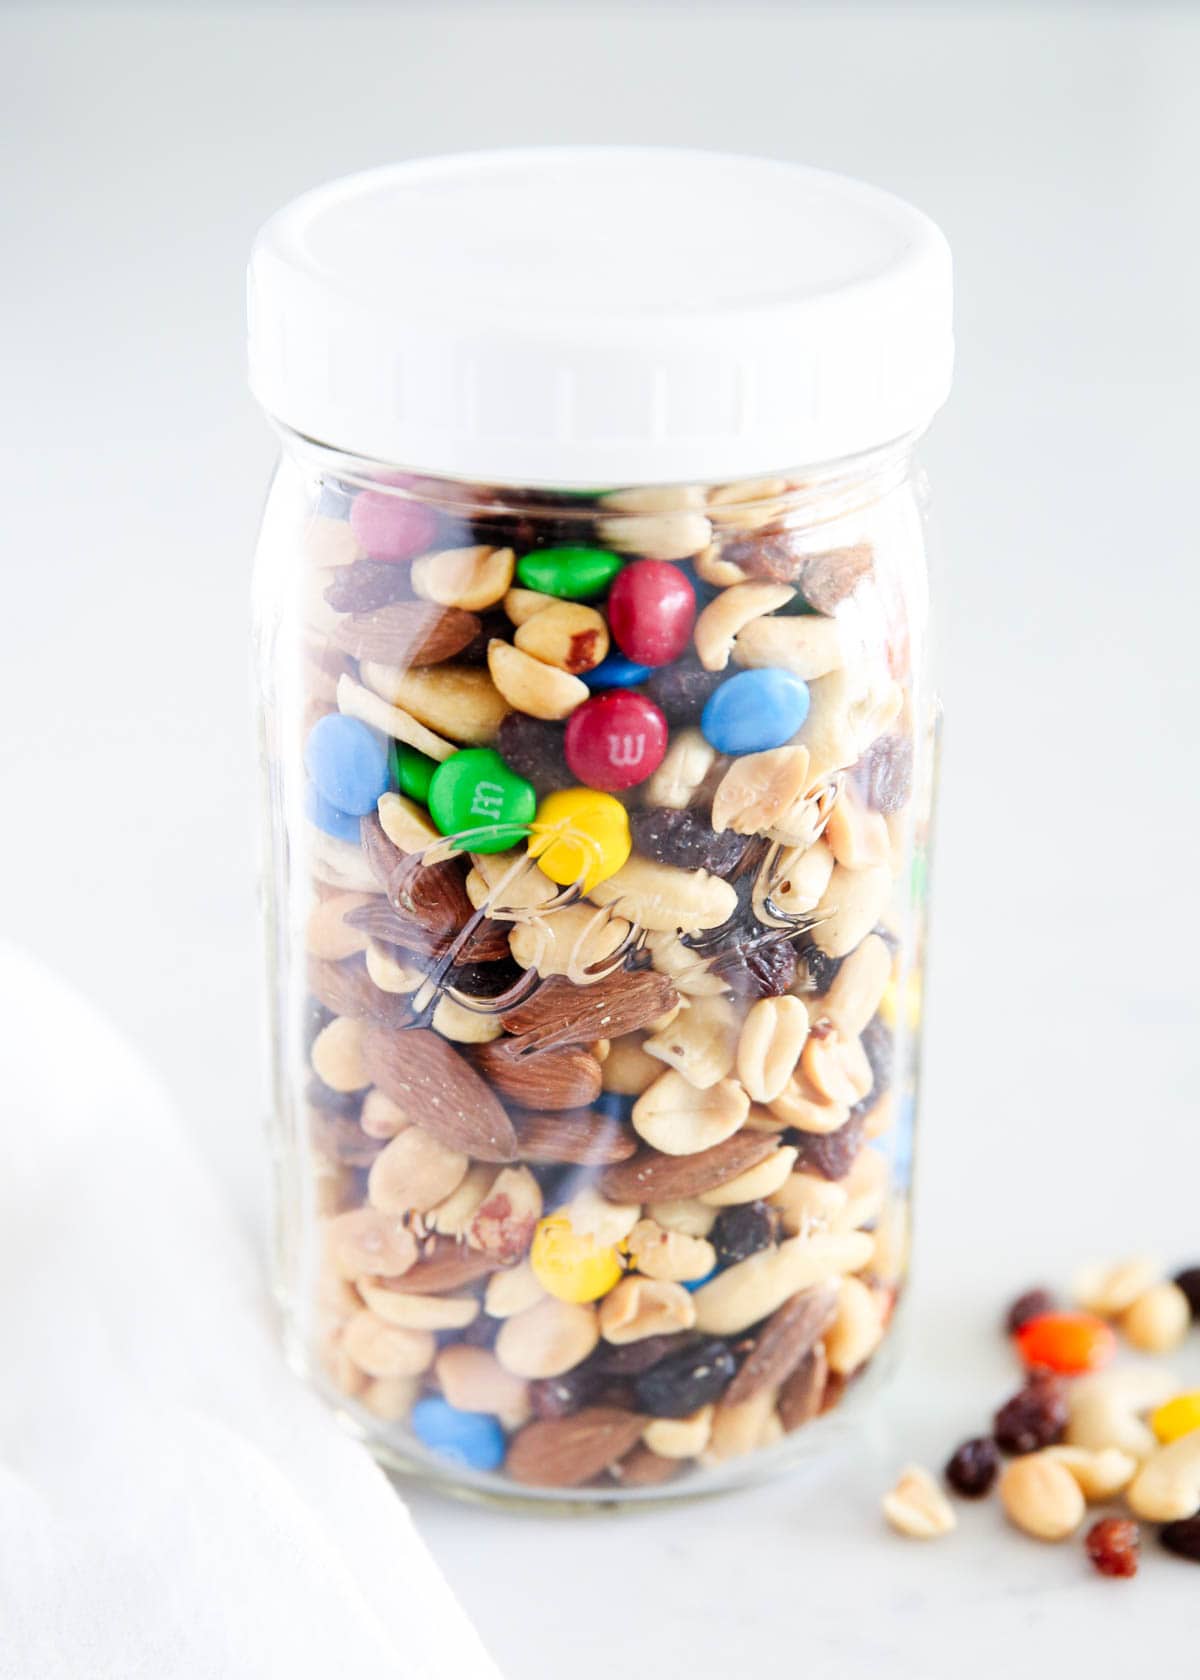 A clear glass jar with a white lid houses an assortment of mixed nuts, seeds, and colorful M&M candies on a light backdrop.